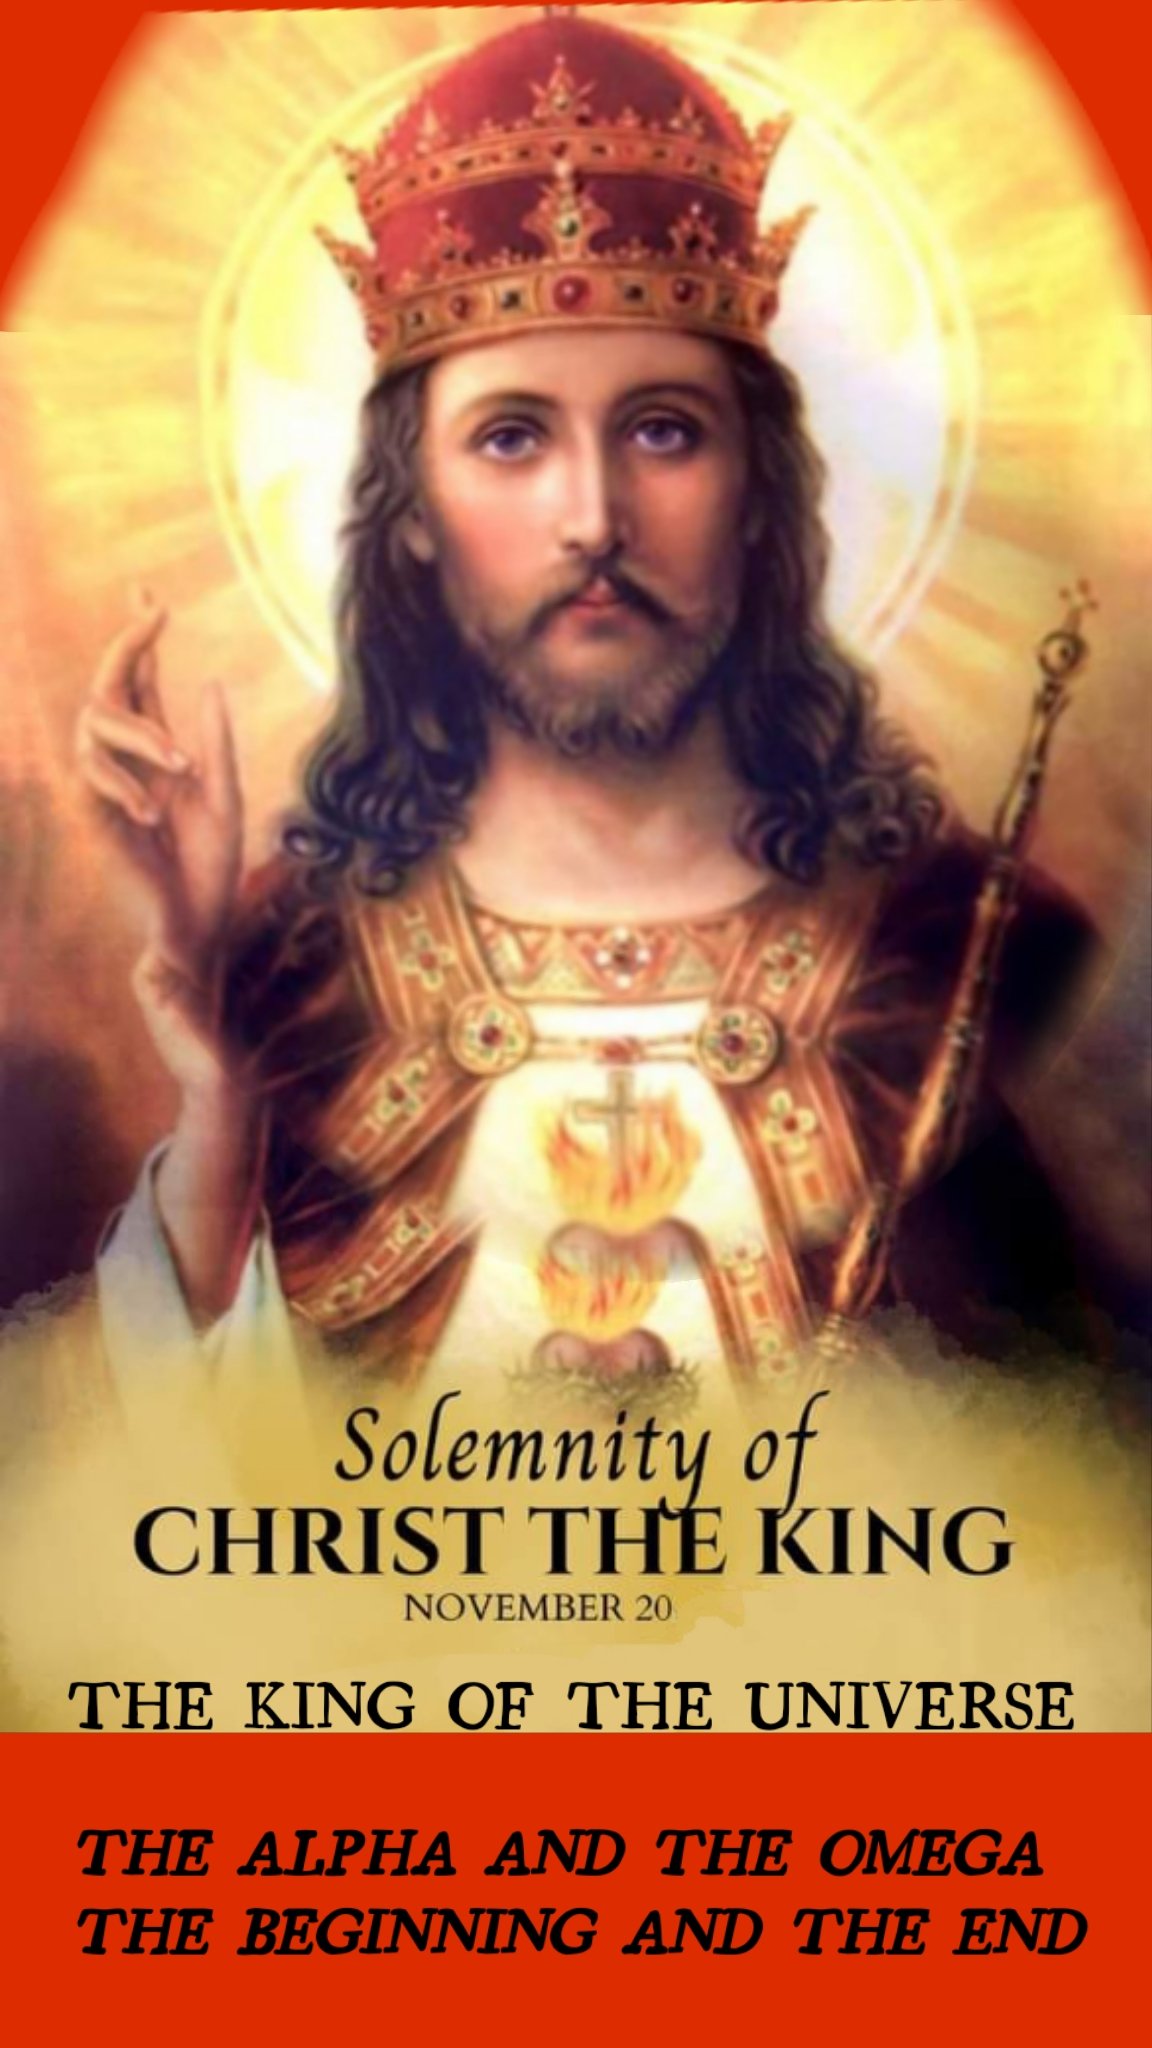 FEAST OF CHRIST THE KING - 20 NOVEMBER - Prayers and Petitions